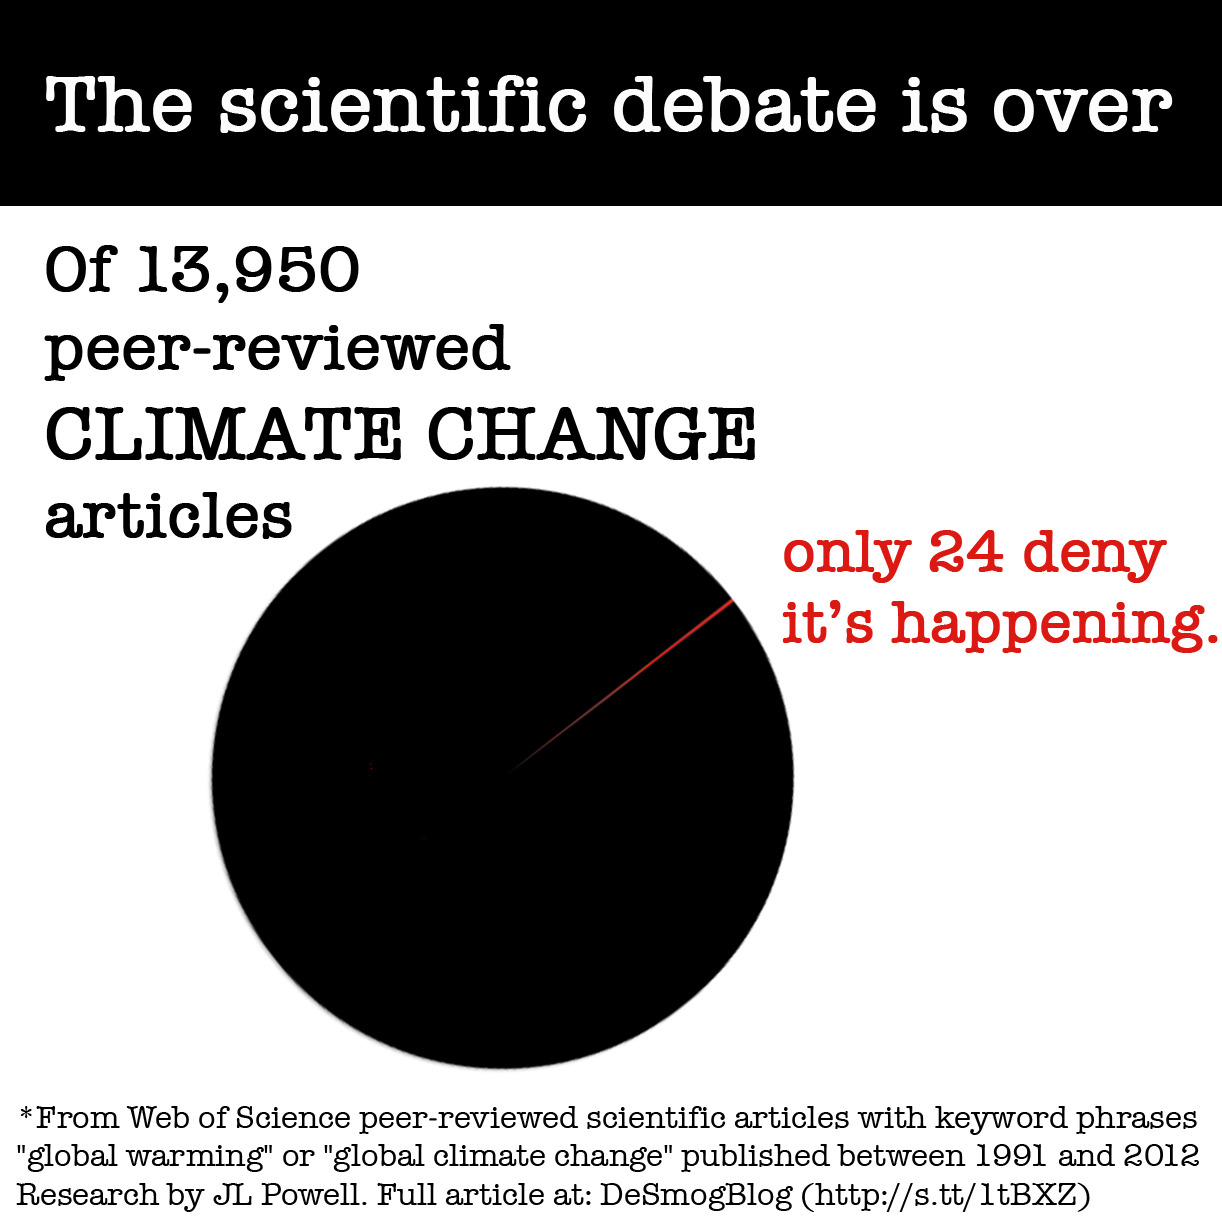 circle - The scientific debate is over Of 13,950 peerreviewed Climate Change articles only 24 deny it's happening. From Web of Science peerreviewed scientific articles with keyword phrases "global warming" or "global climate change" published between 1991